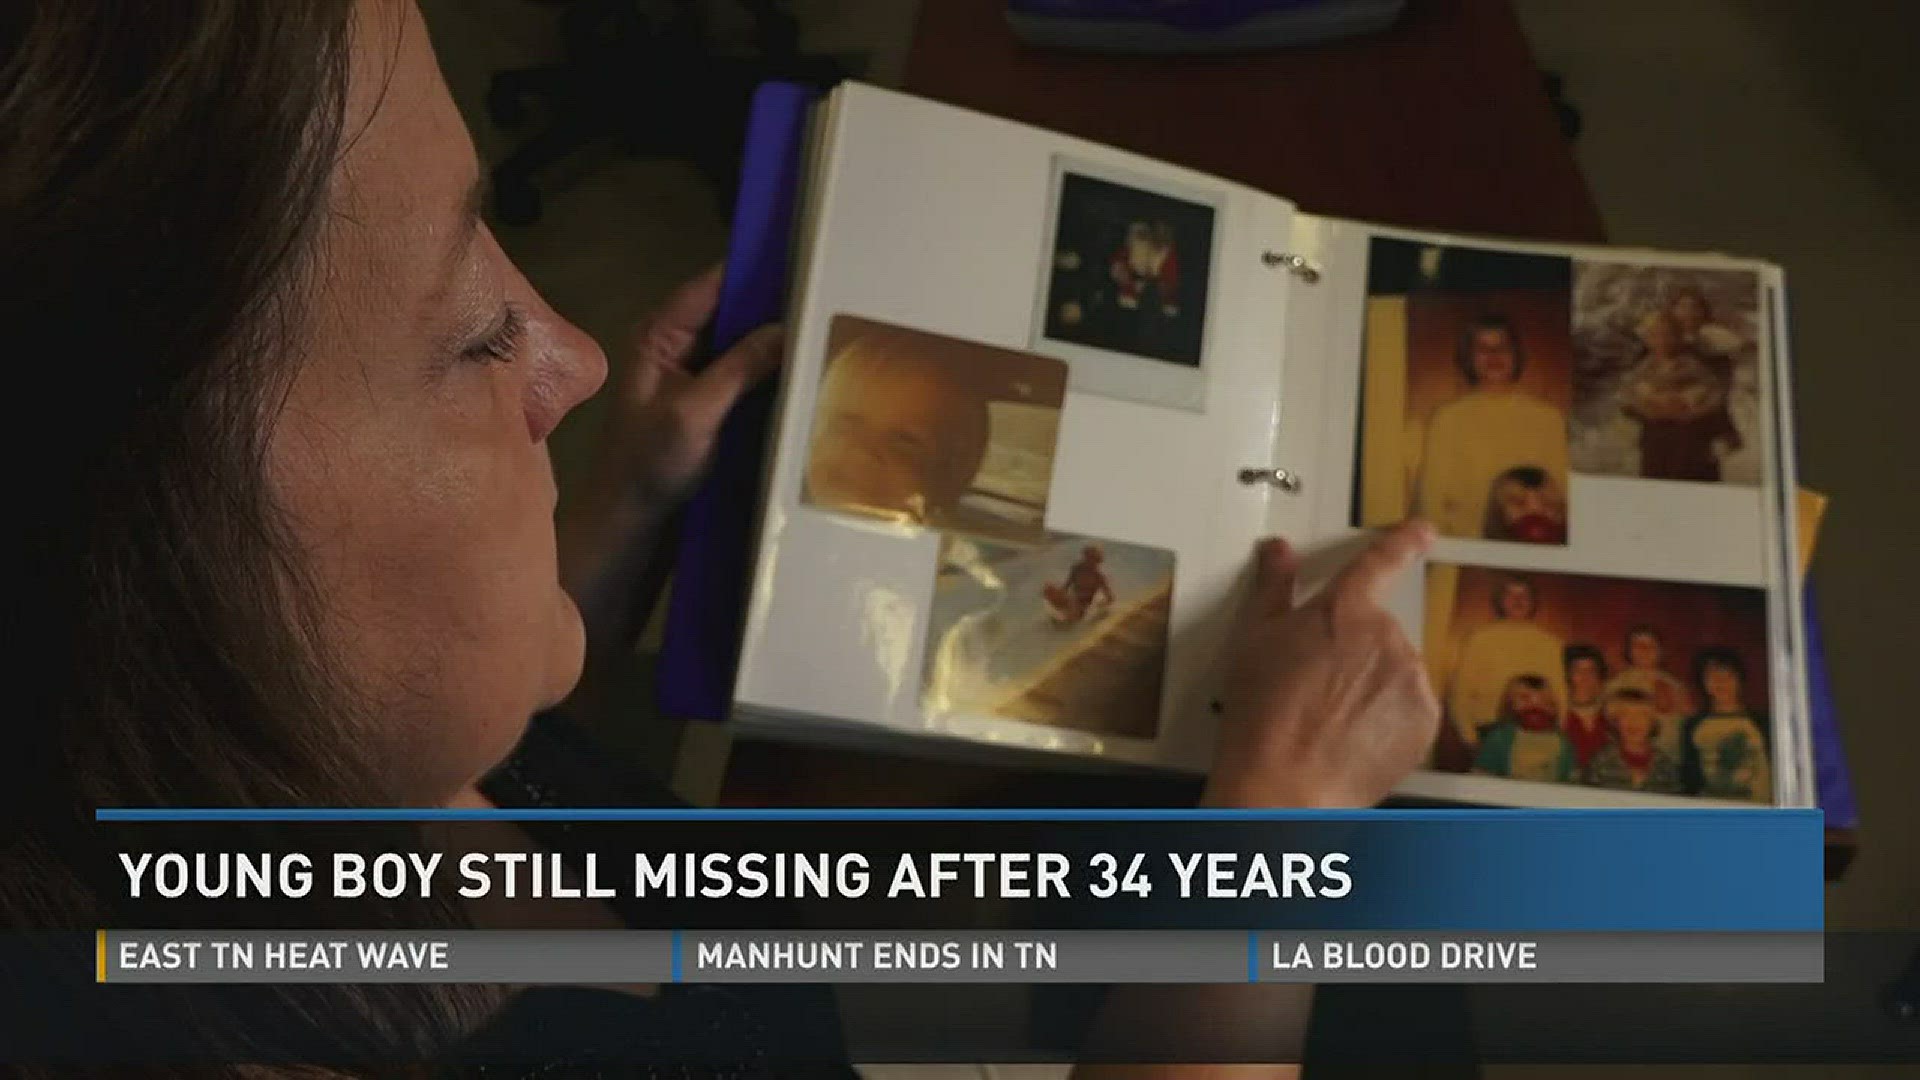 We dig into the case of a missing person that's been active for more than 3 decades.